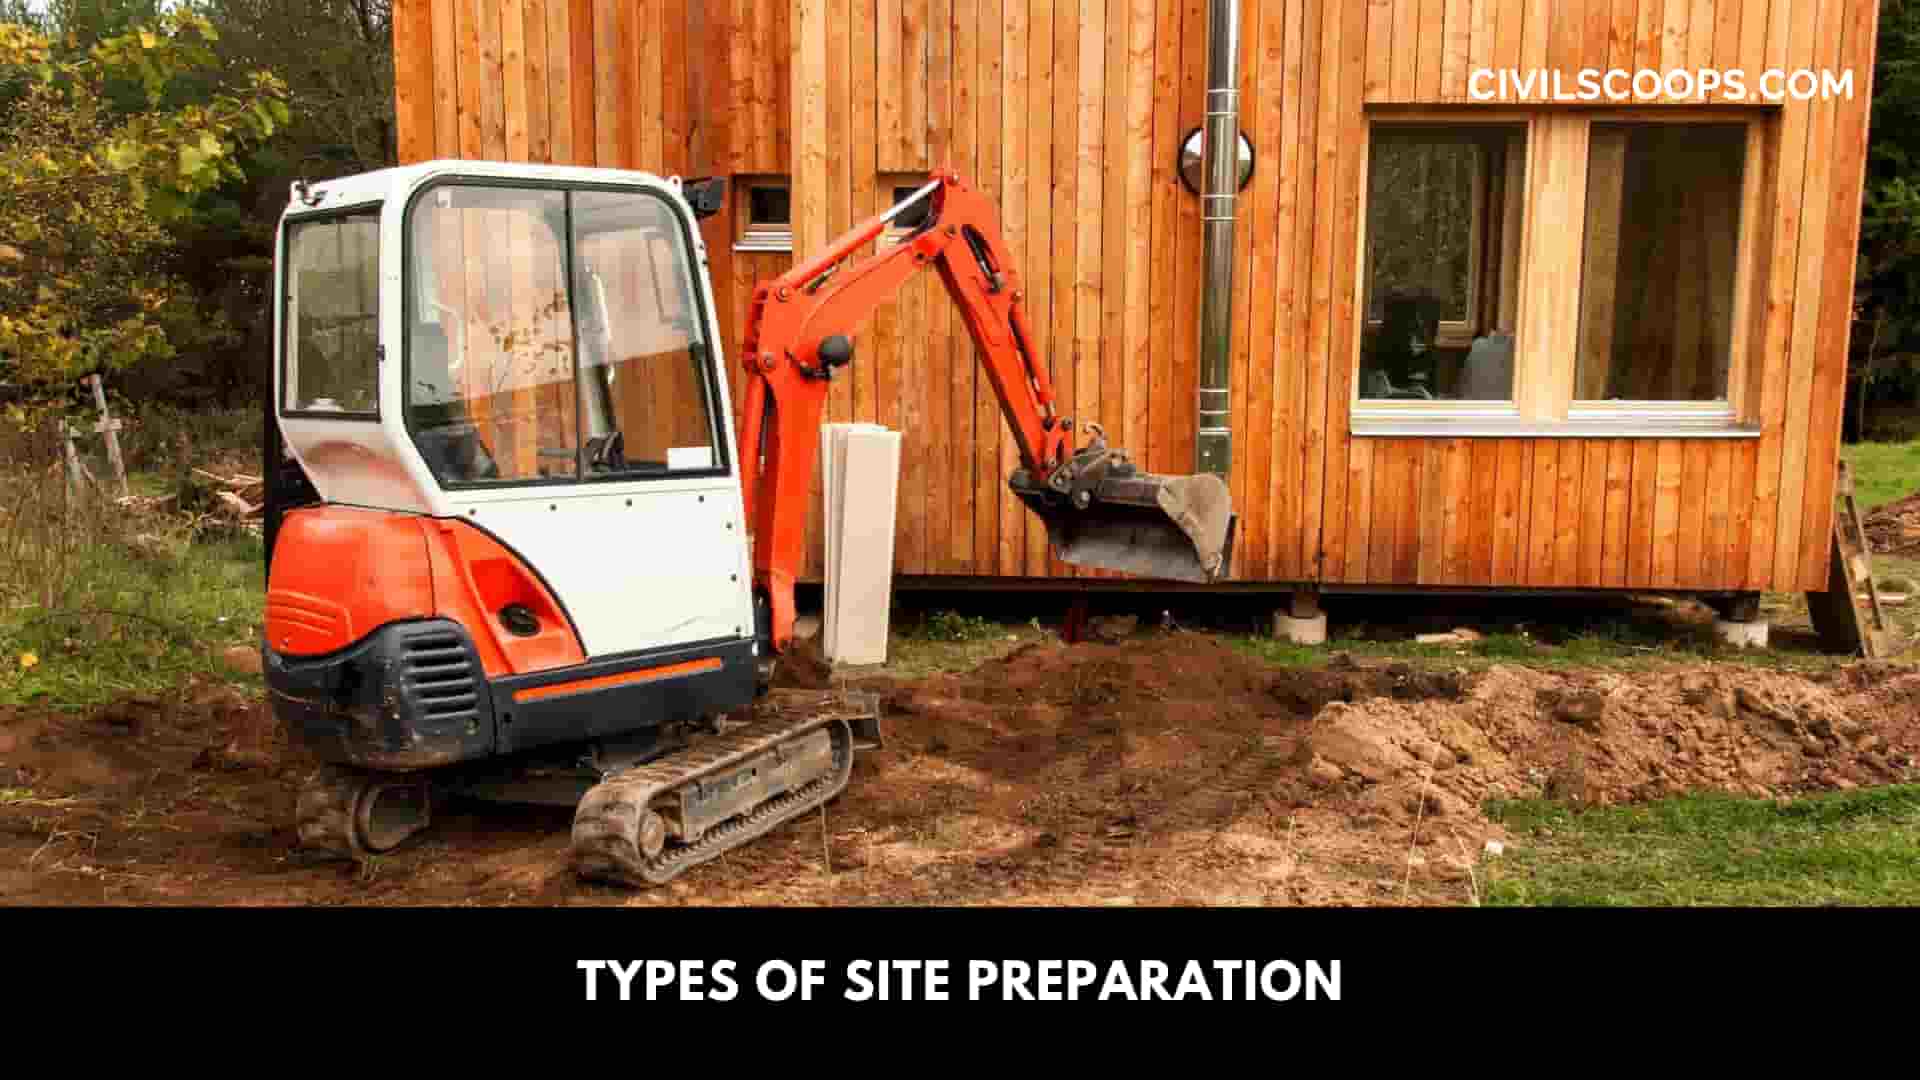 Types of Site Preparation